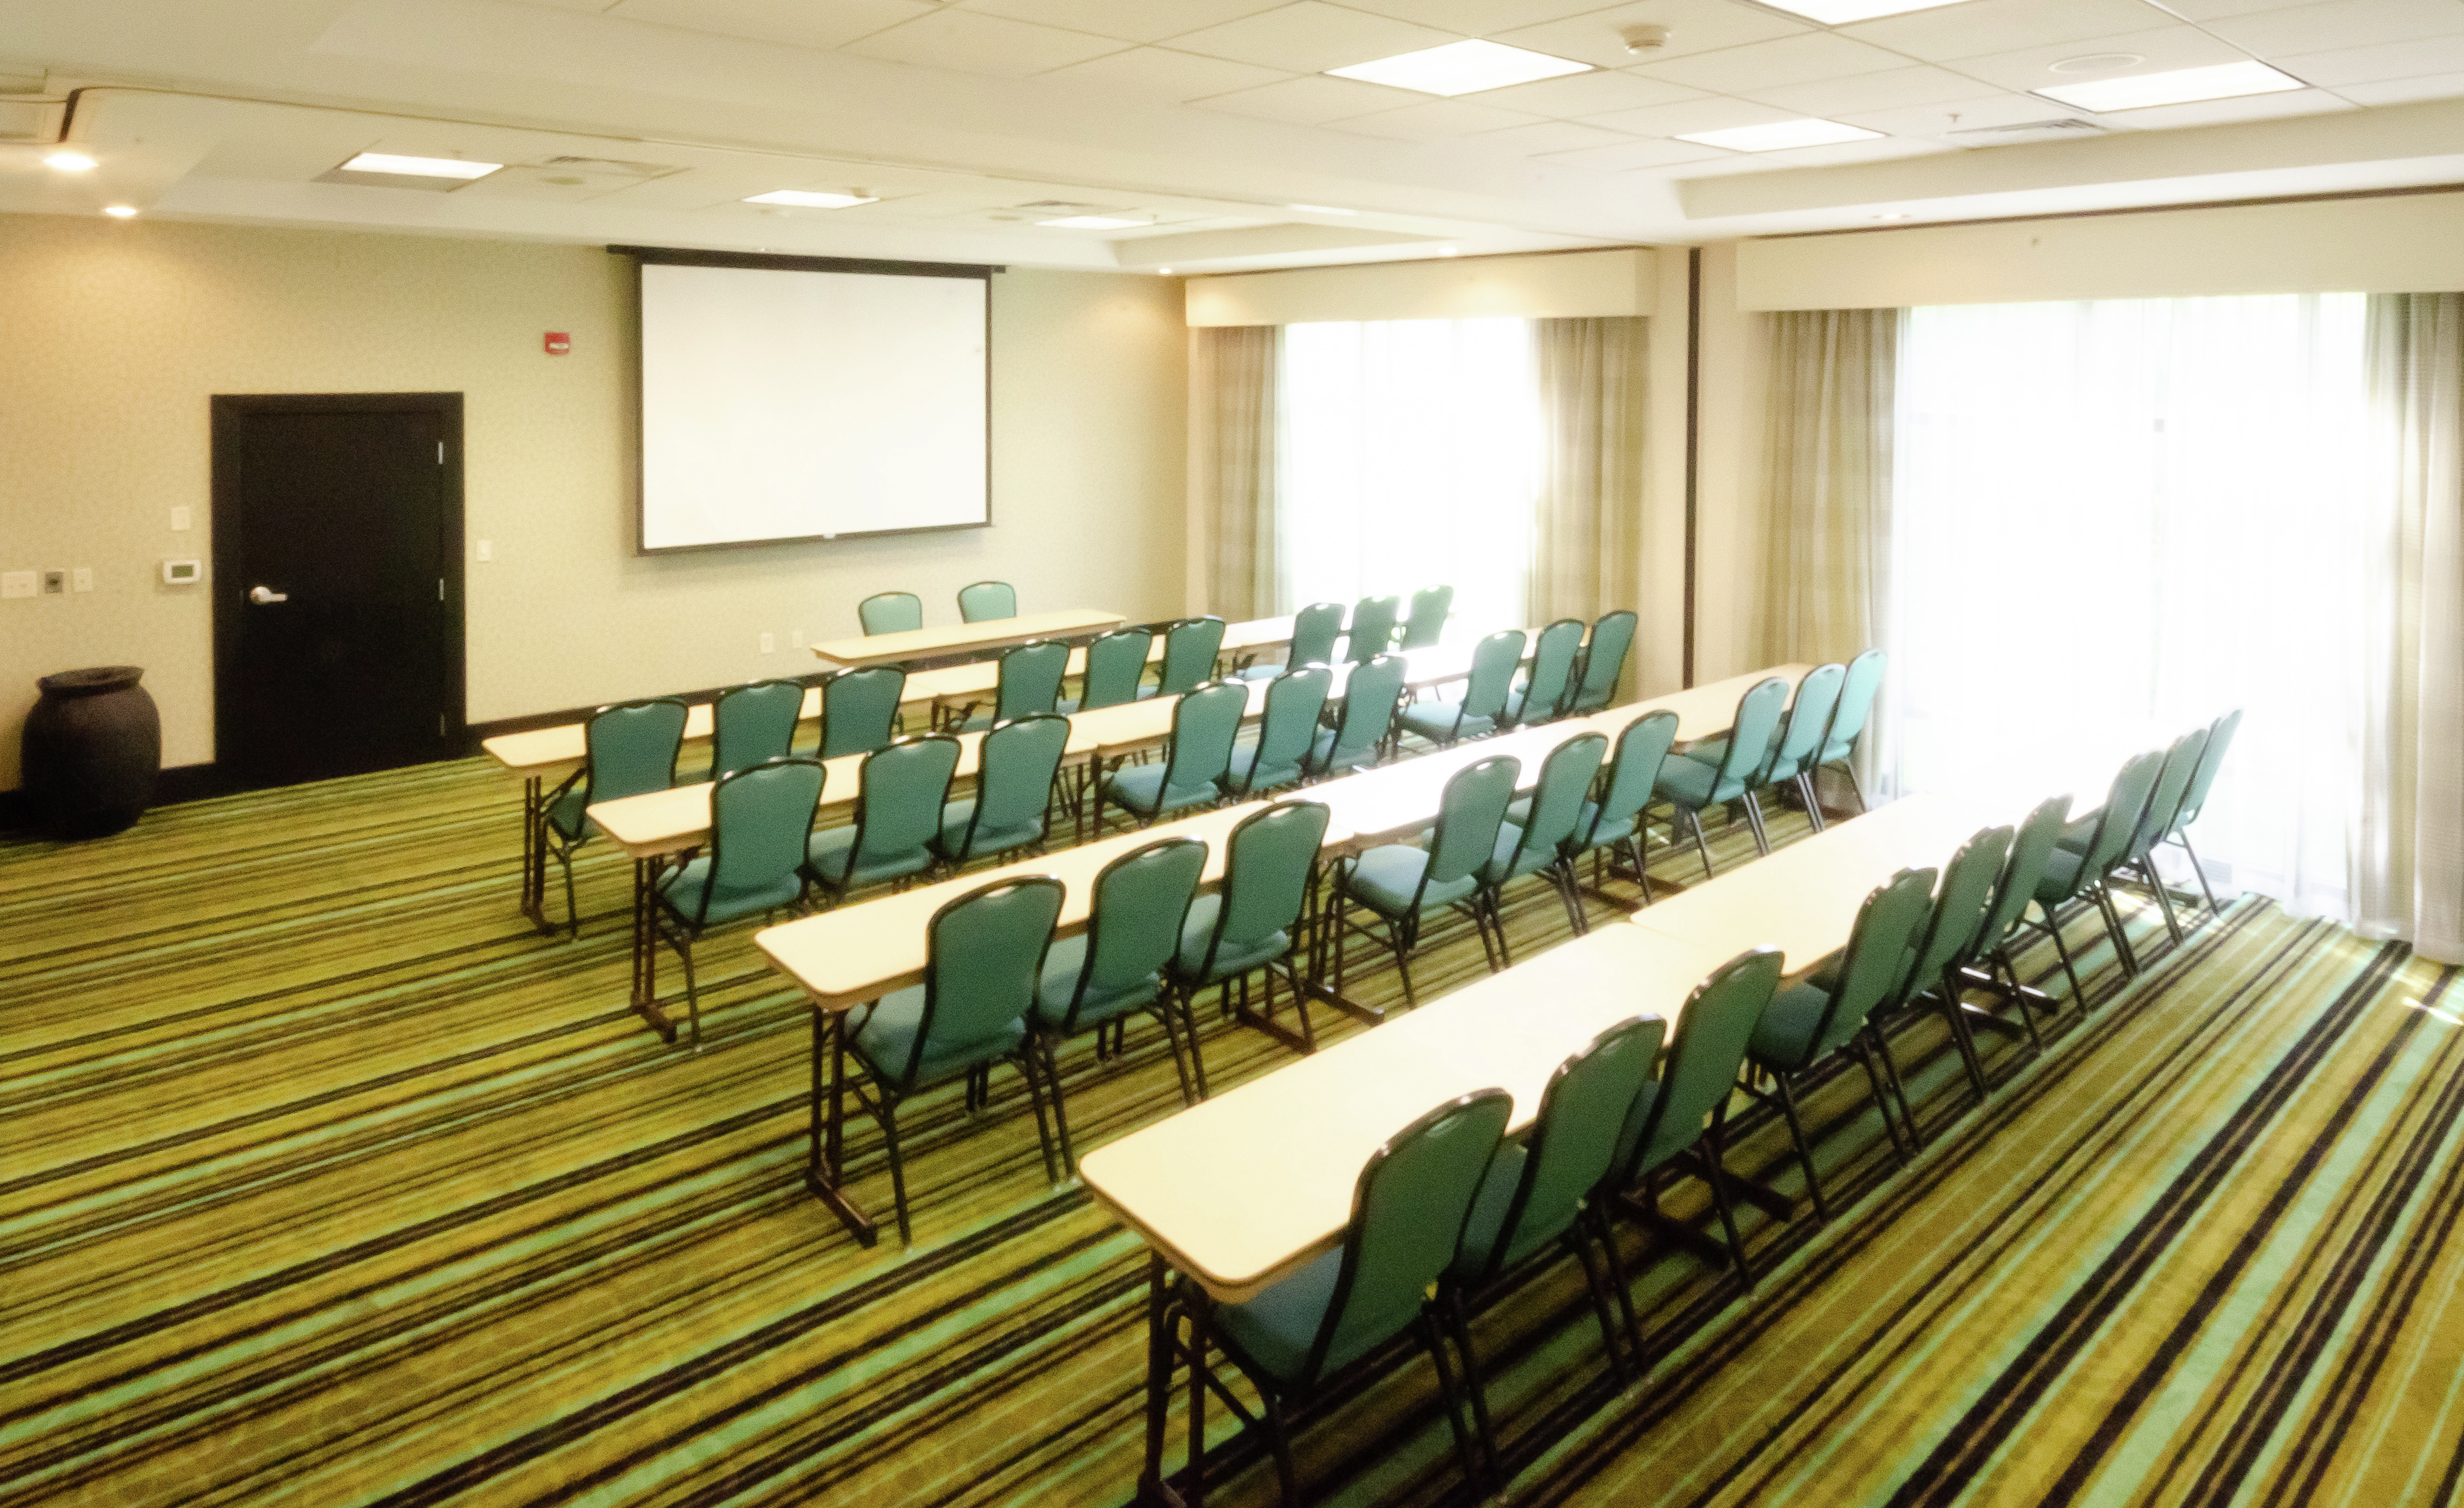 Meeting Room with Seating Facing a Projector Screen